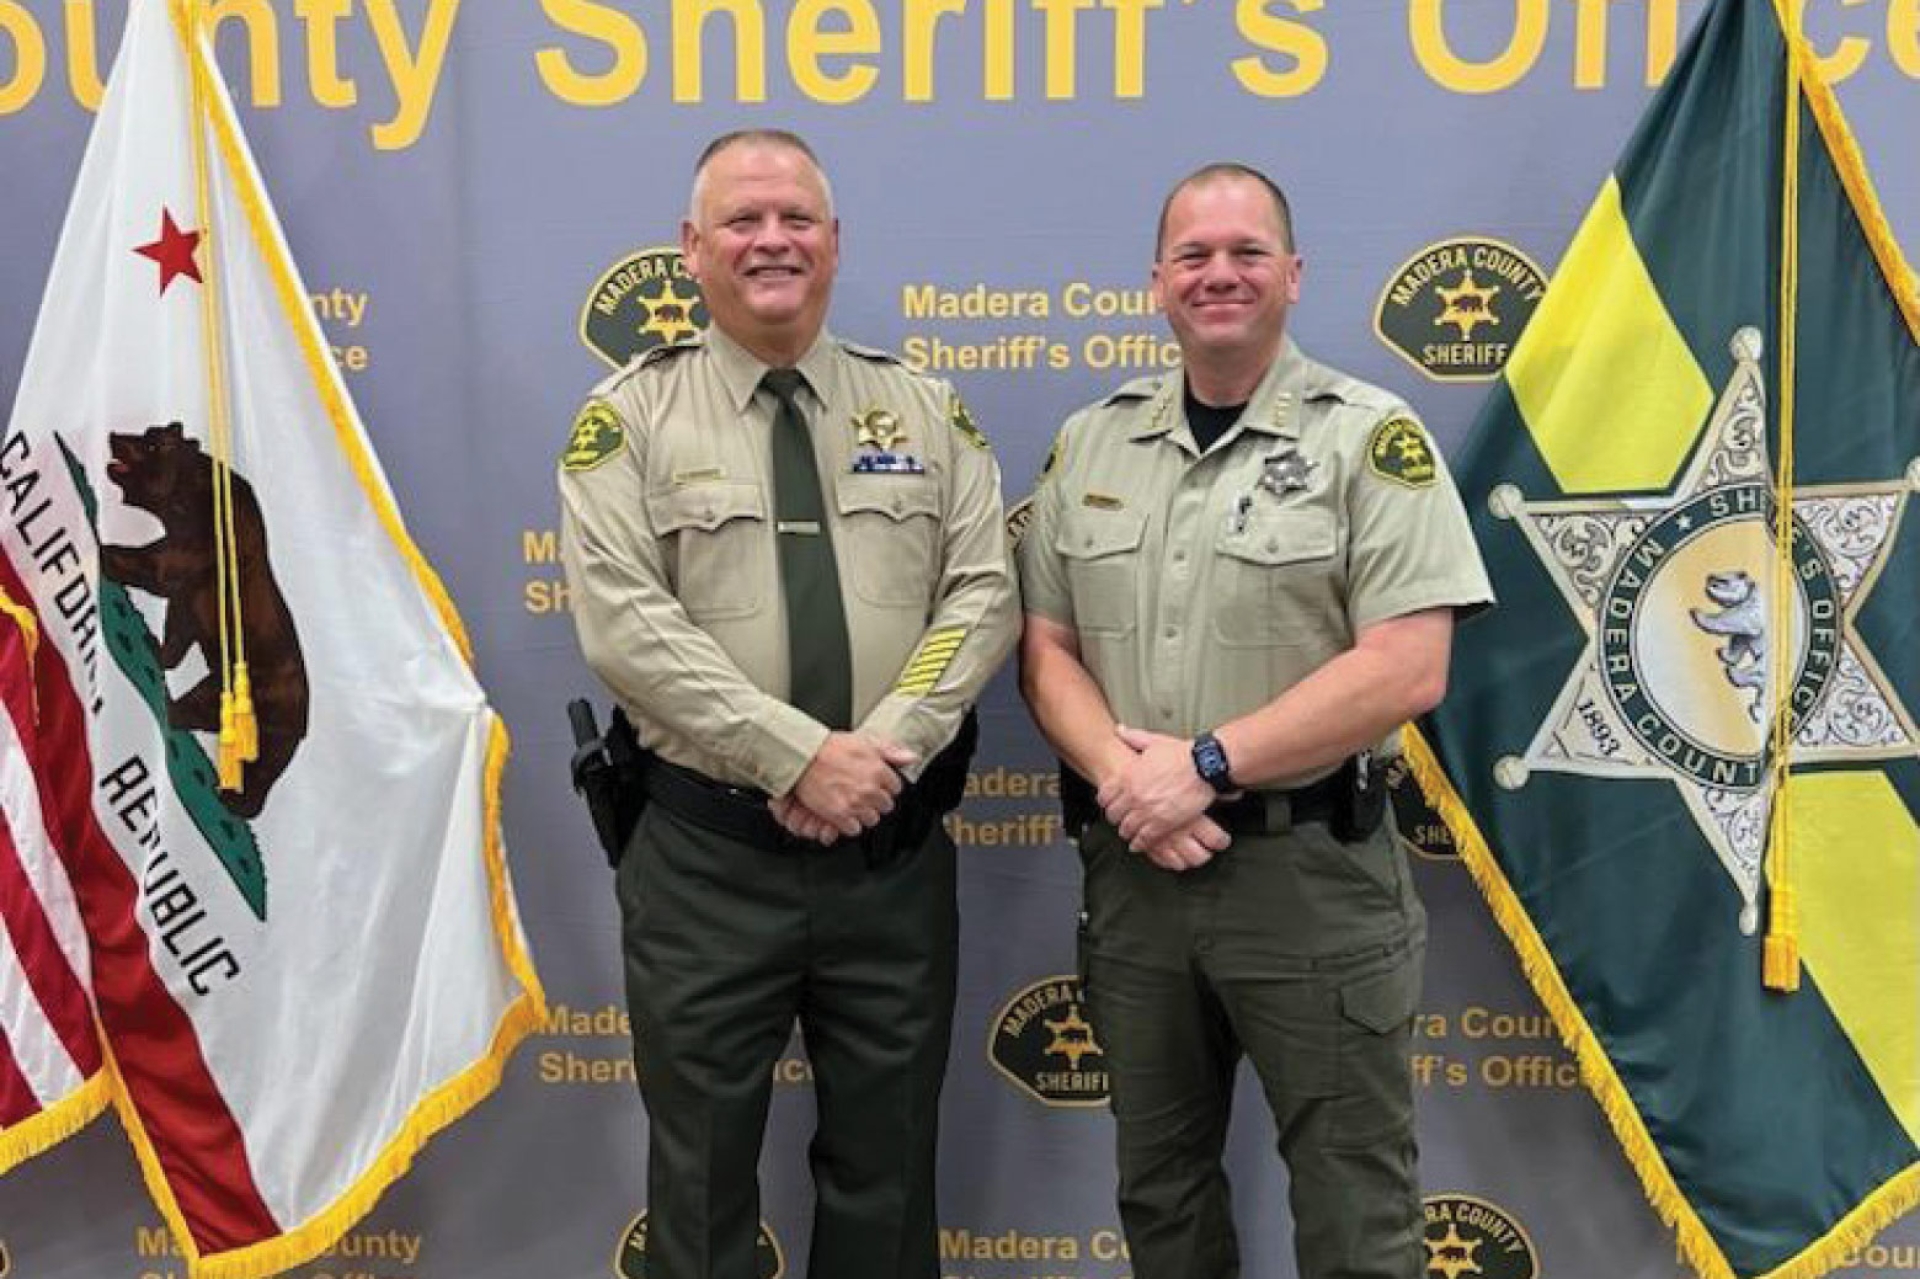 retired-lapd-reserve-jeff-nocket-joins-madera-county-sheriffs-office-1